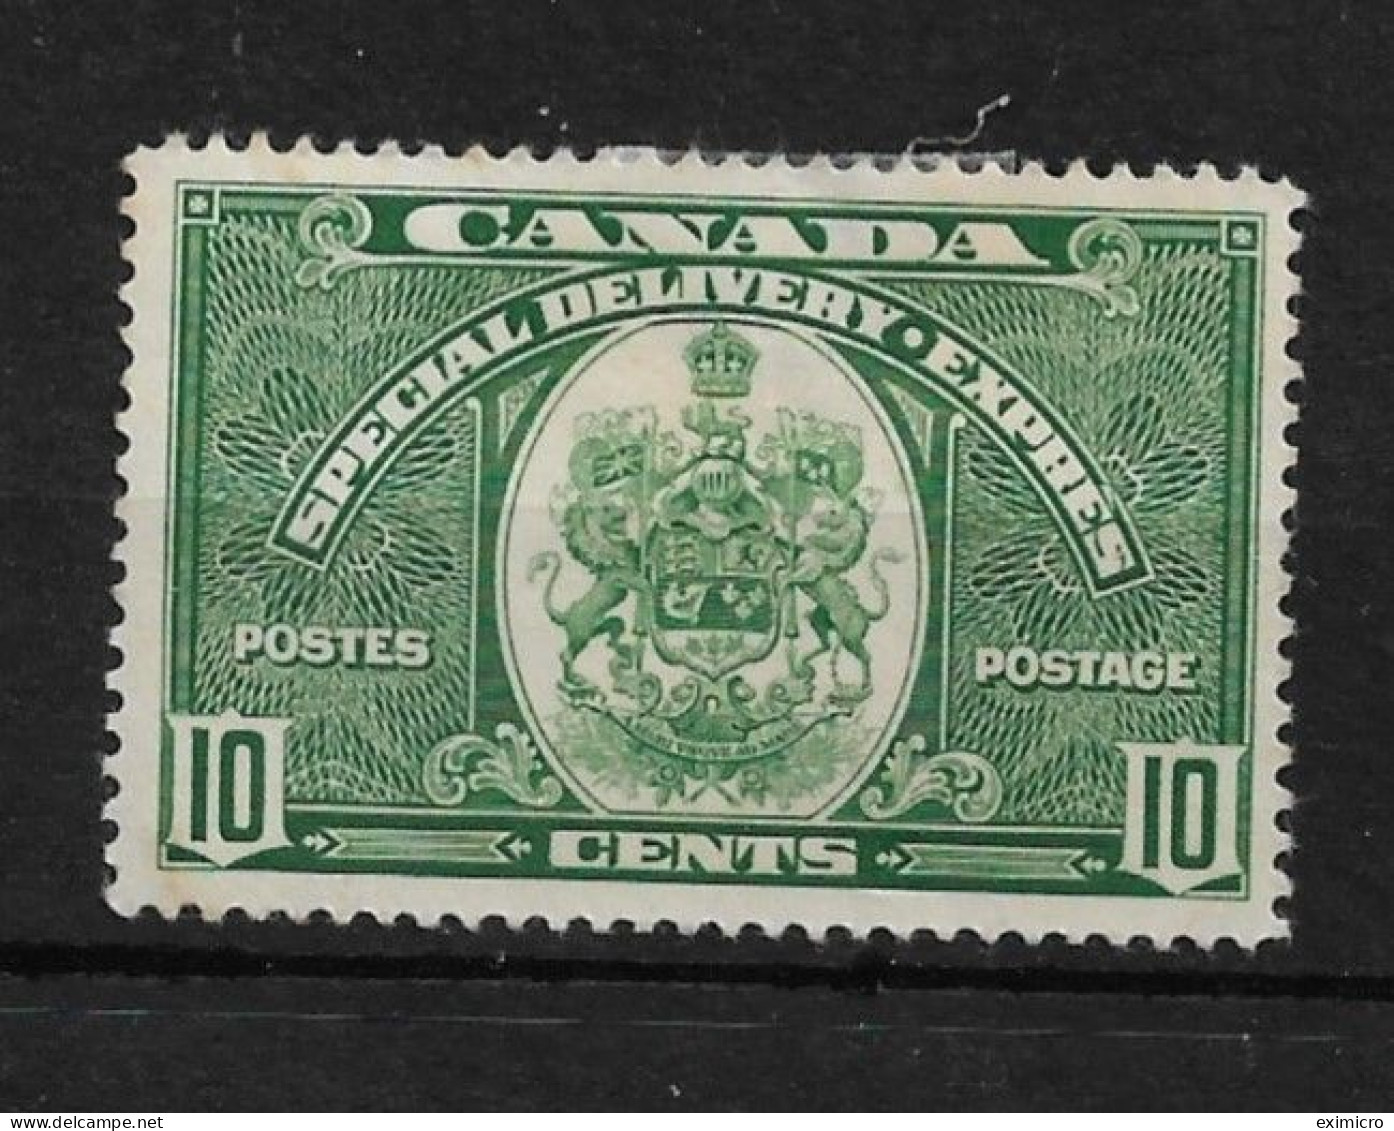 CANADA 1939 10c SPECIAL DELIVERY SG S9 MOUNTED MINT Cat £24 - Eilbriefmarken